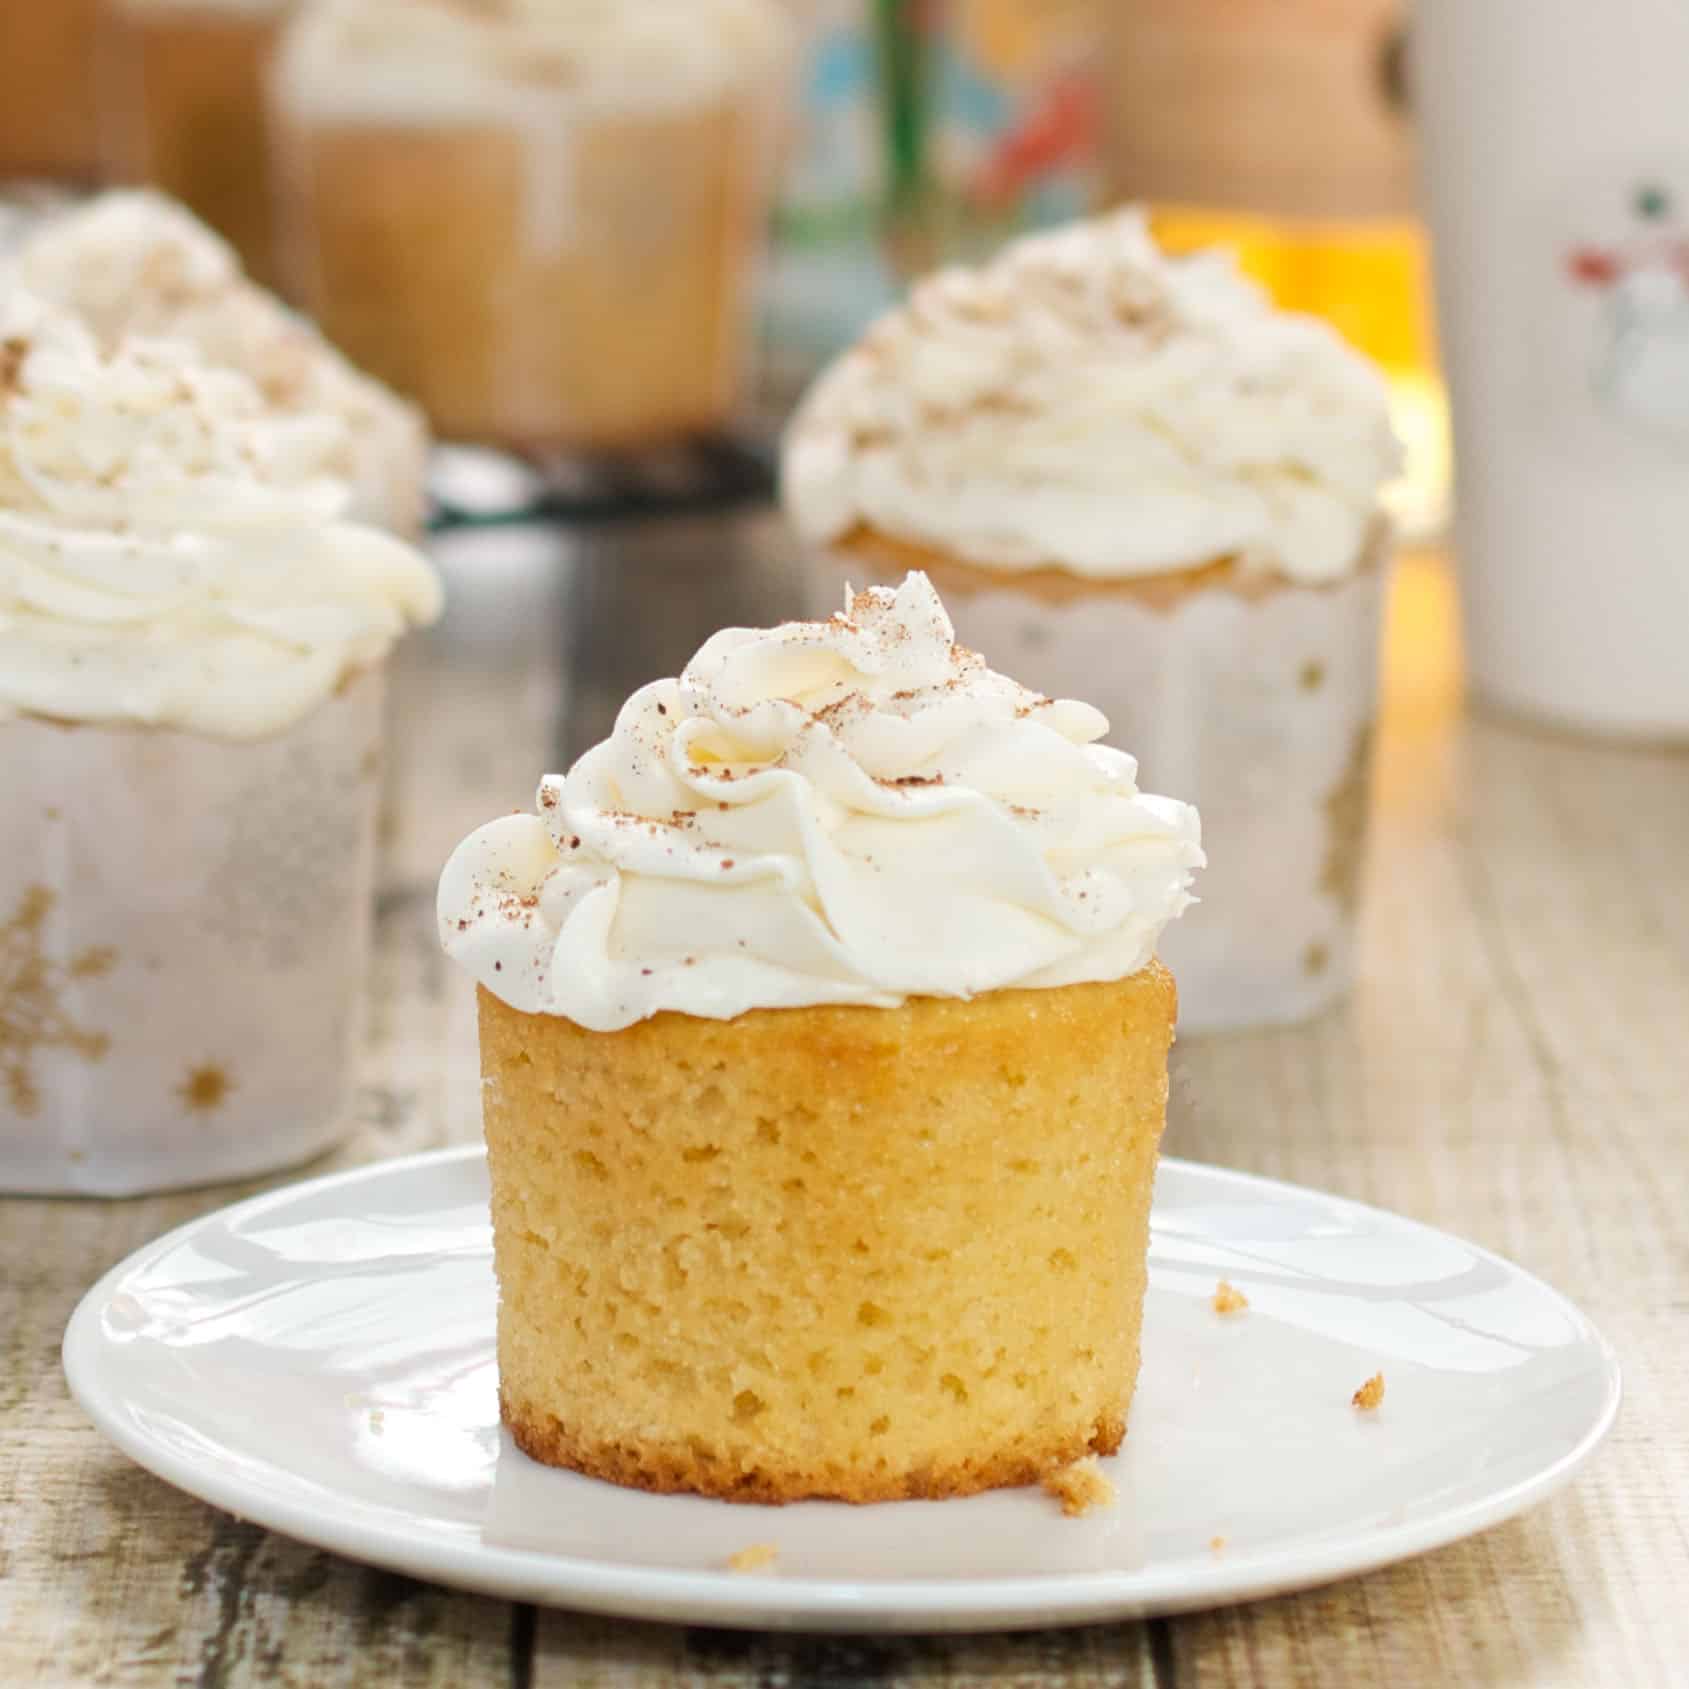 Eggnog Cupcakes with Rum-Infused Frosting